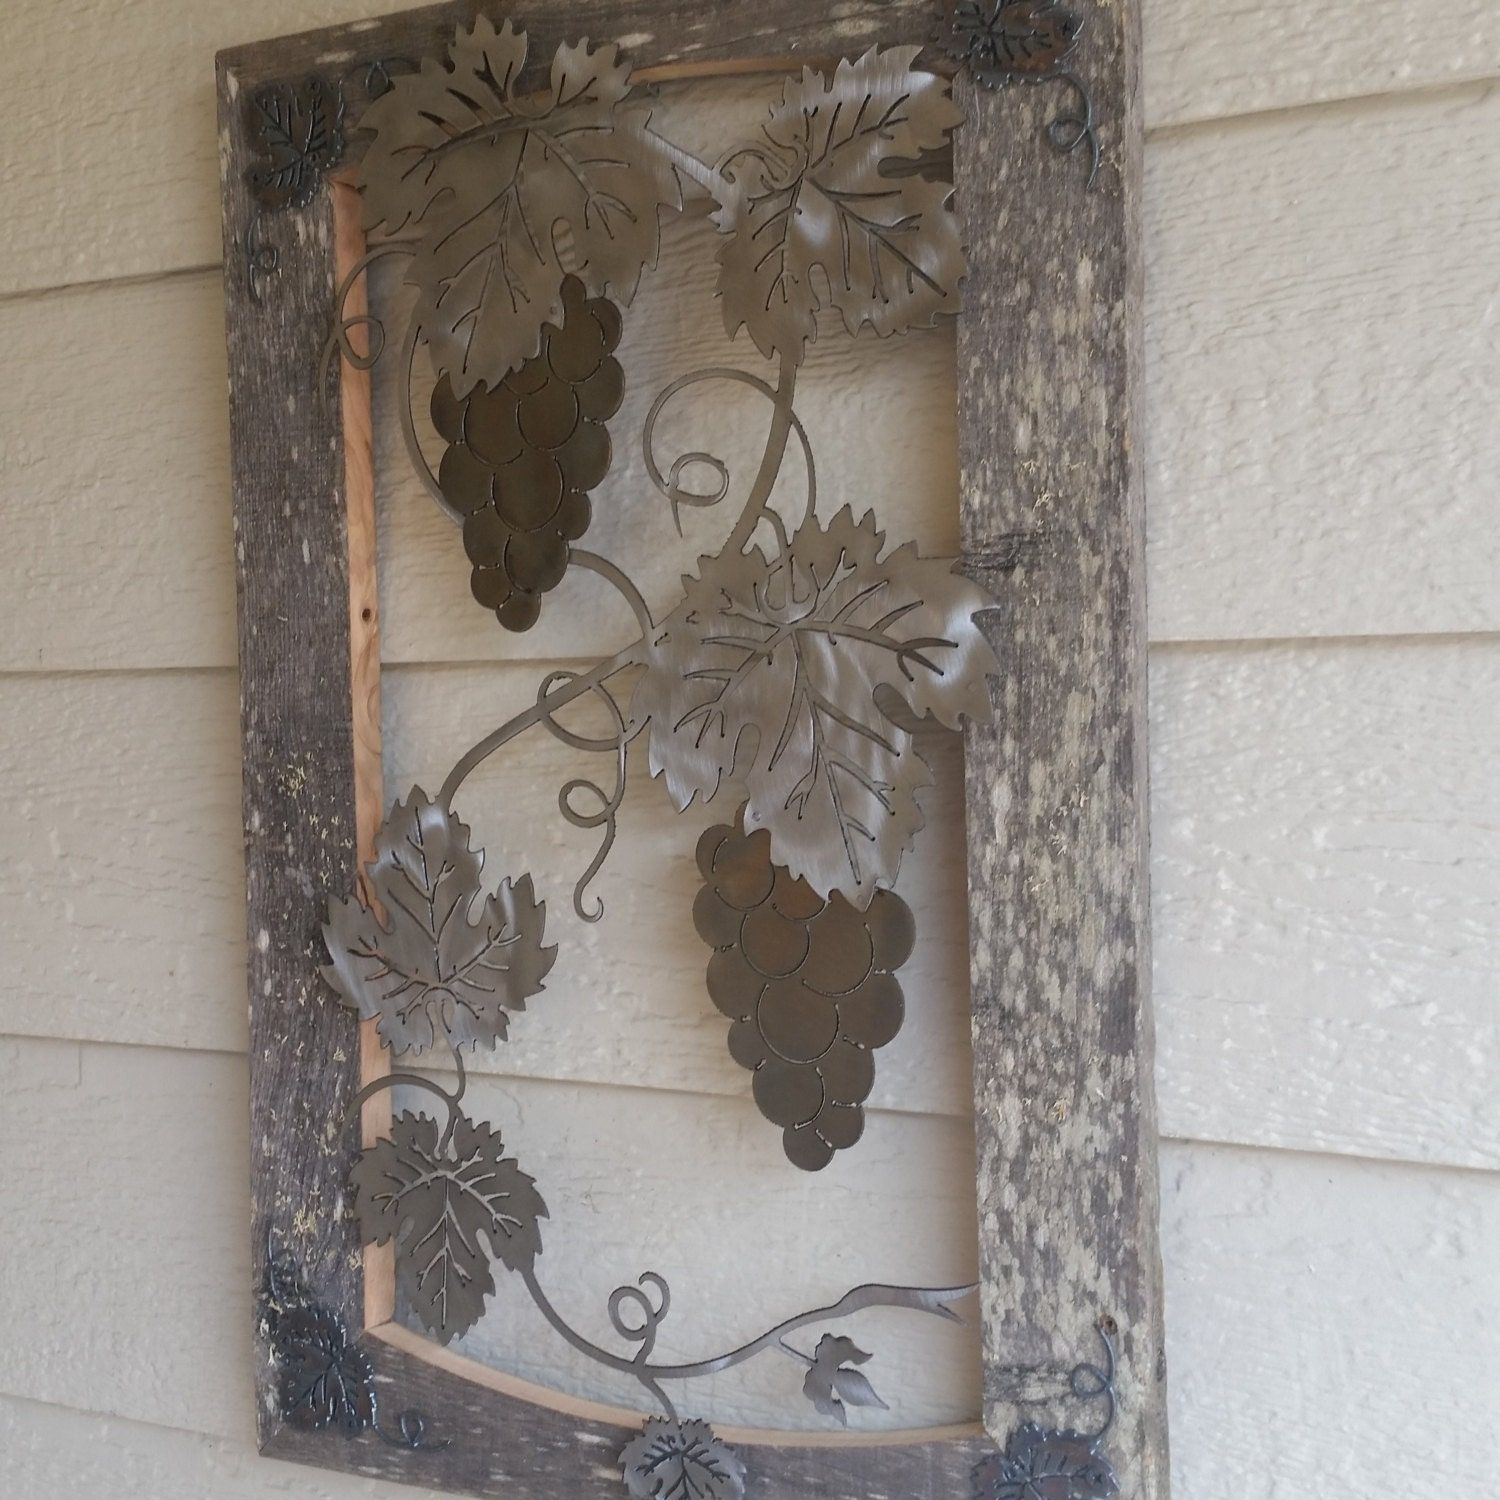 Grapes On The Vine Recycled Metal Wall Art Intended For Grapes Wall Art (View 10 of 15)